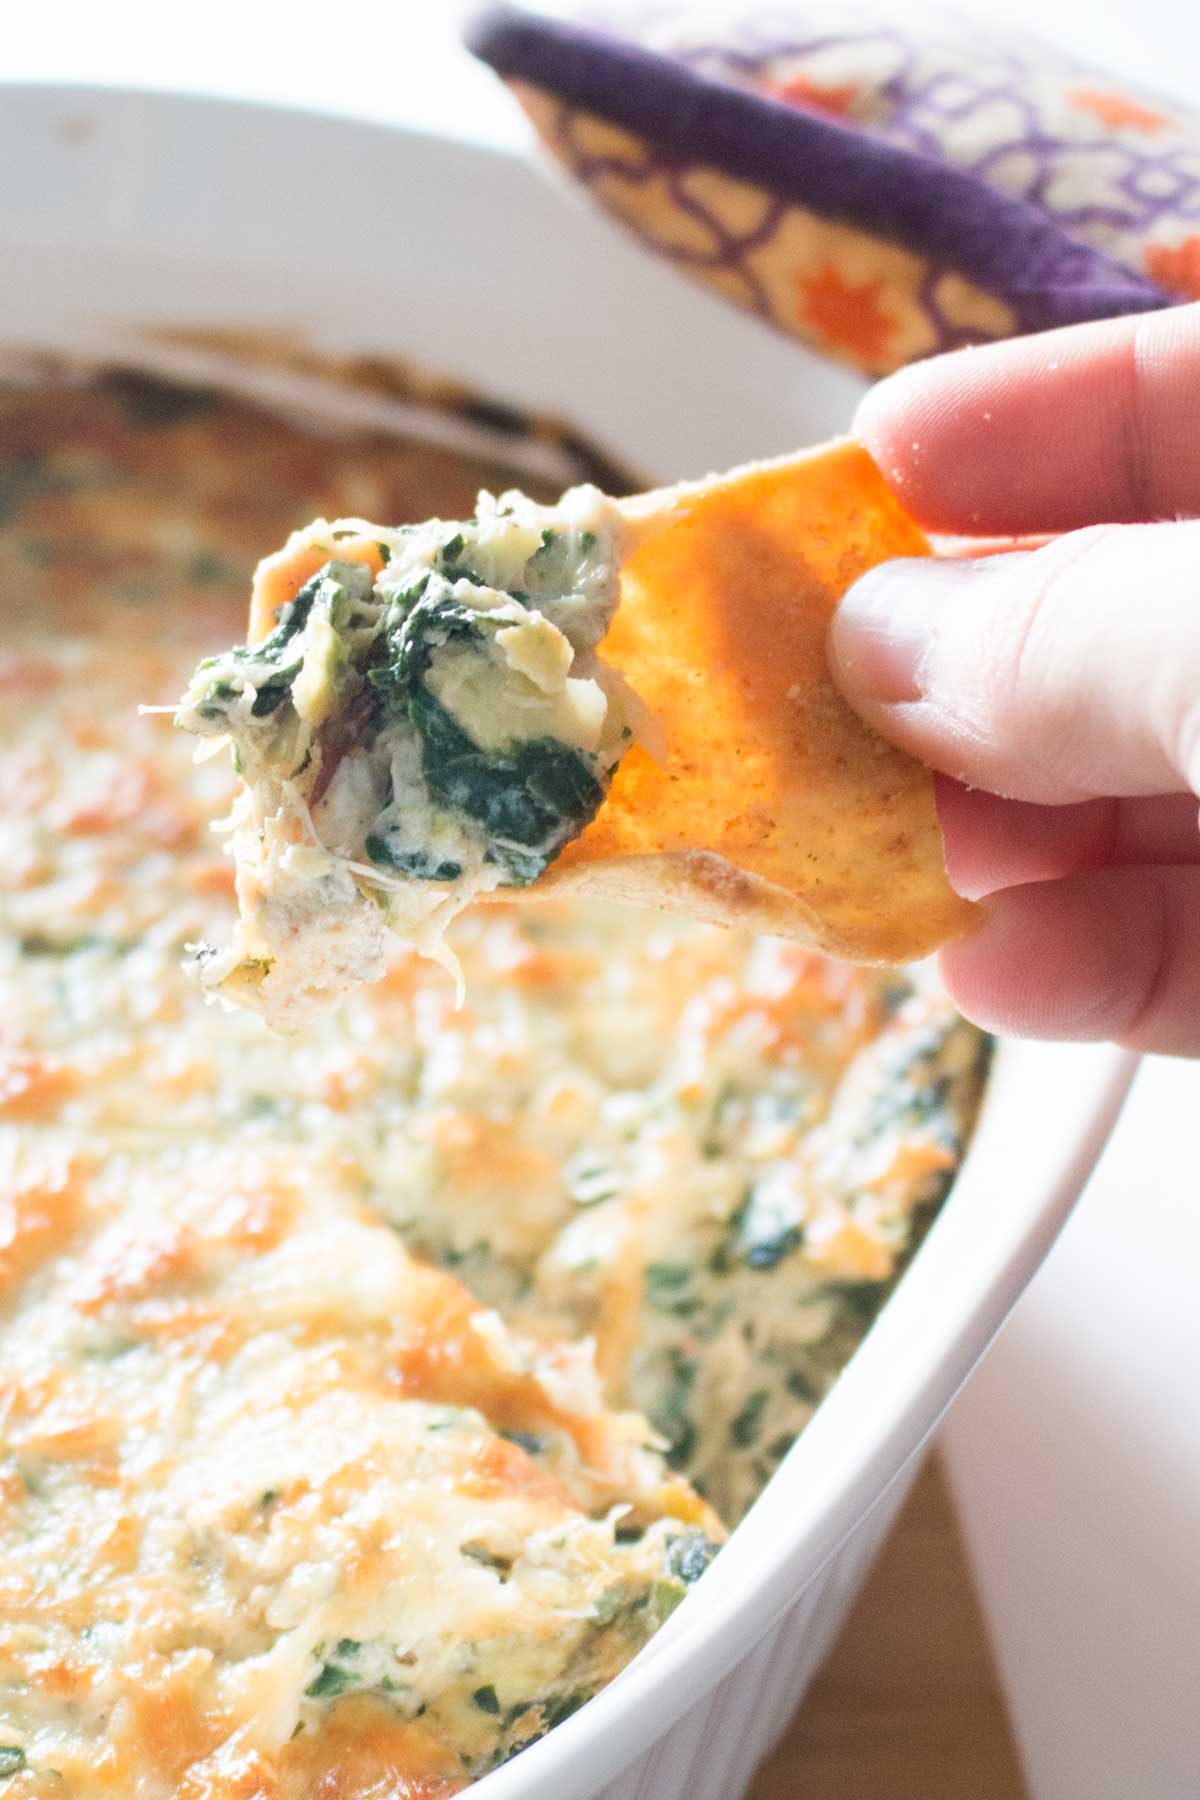 Pita chip with baked spinach, artichoke, and crab dip